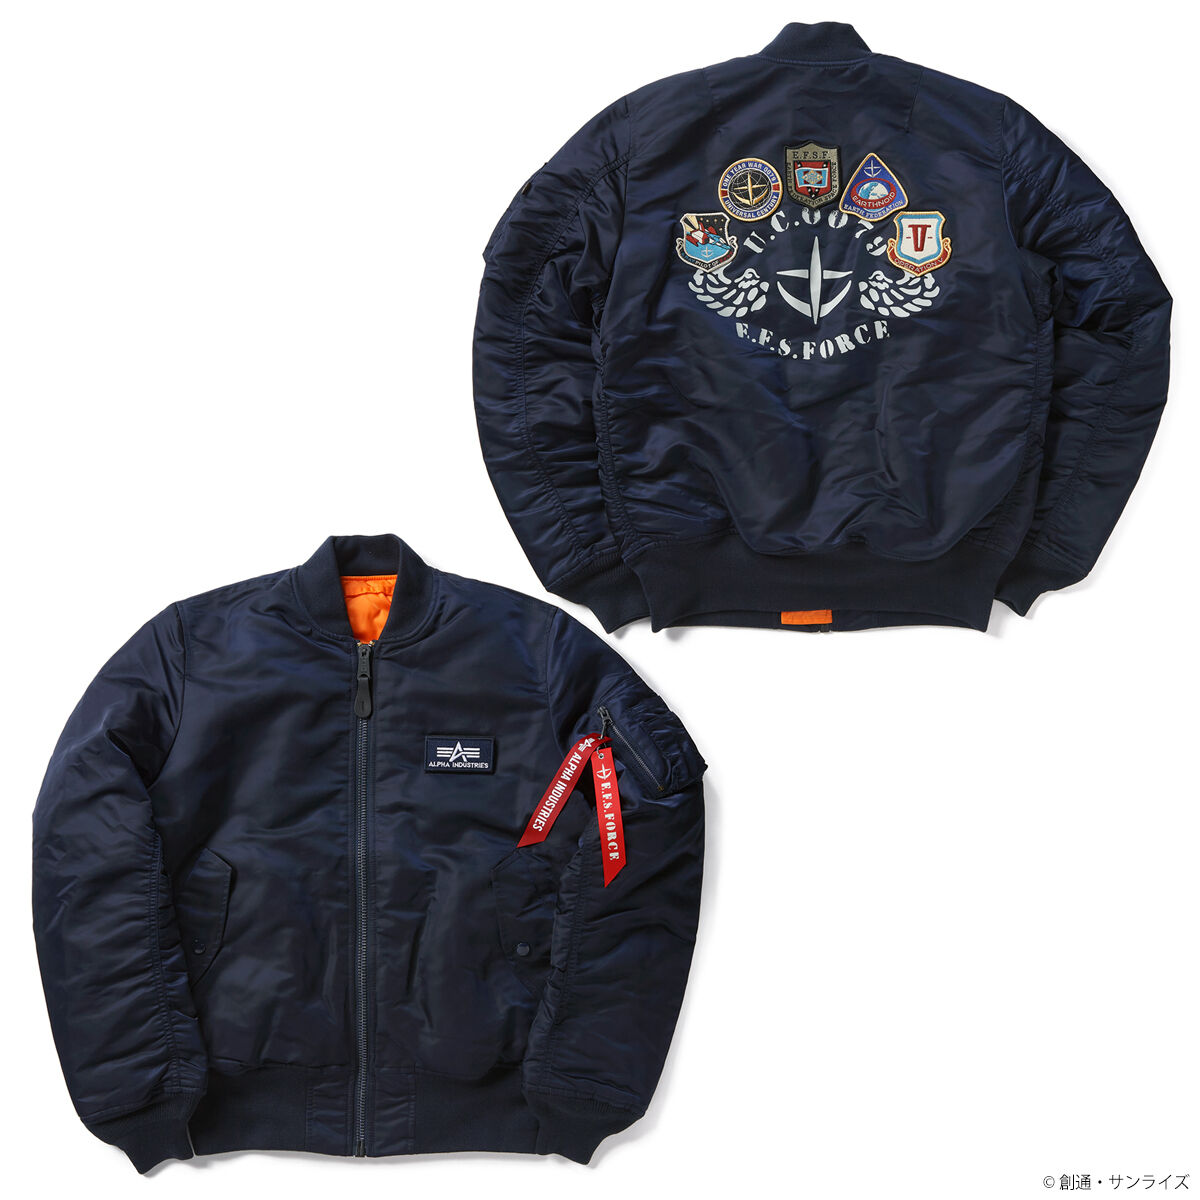 STRICT G x ALPHA Mobile Suit Gundam Earth Federation Space Force MA Jacket